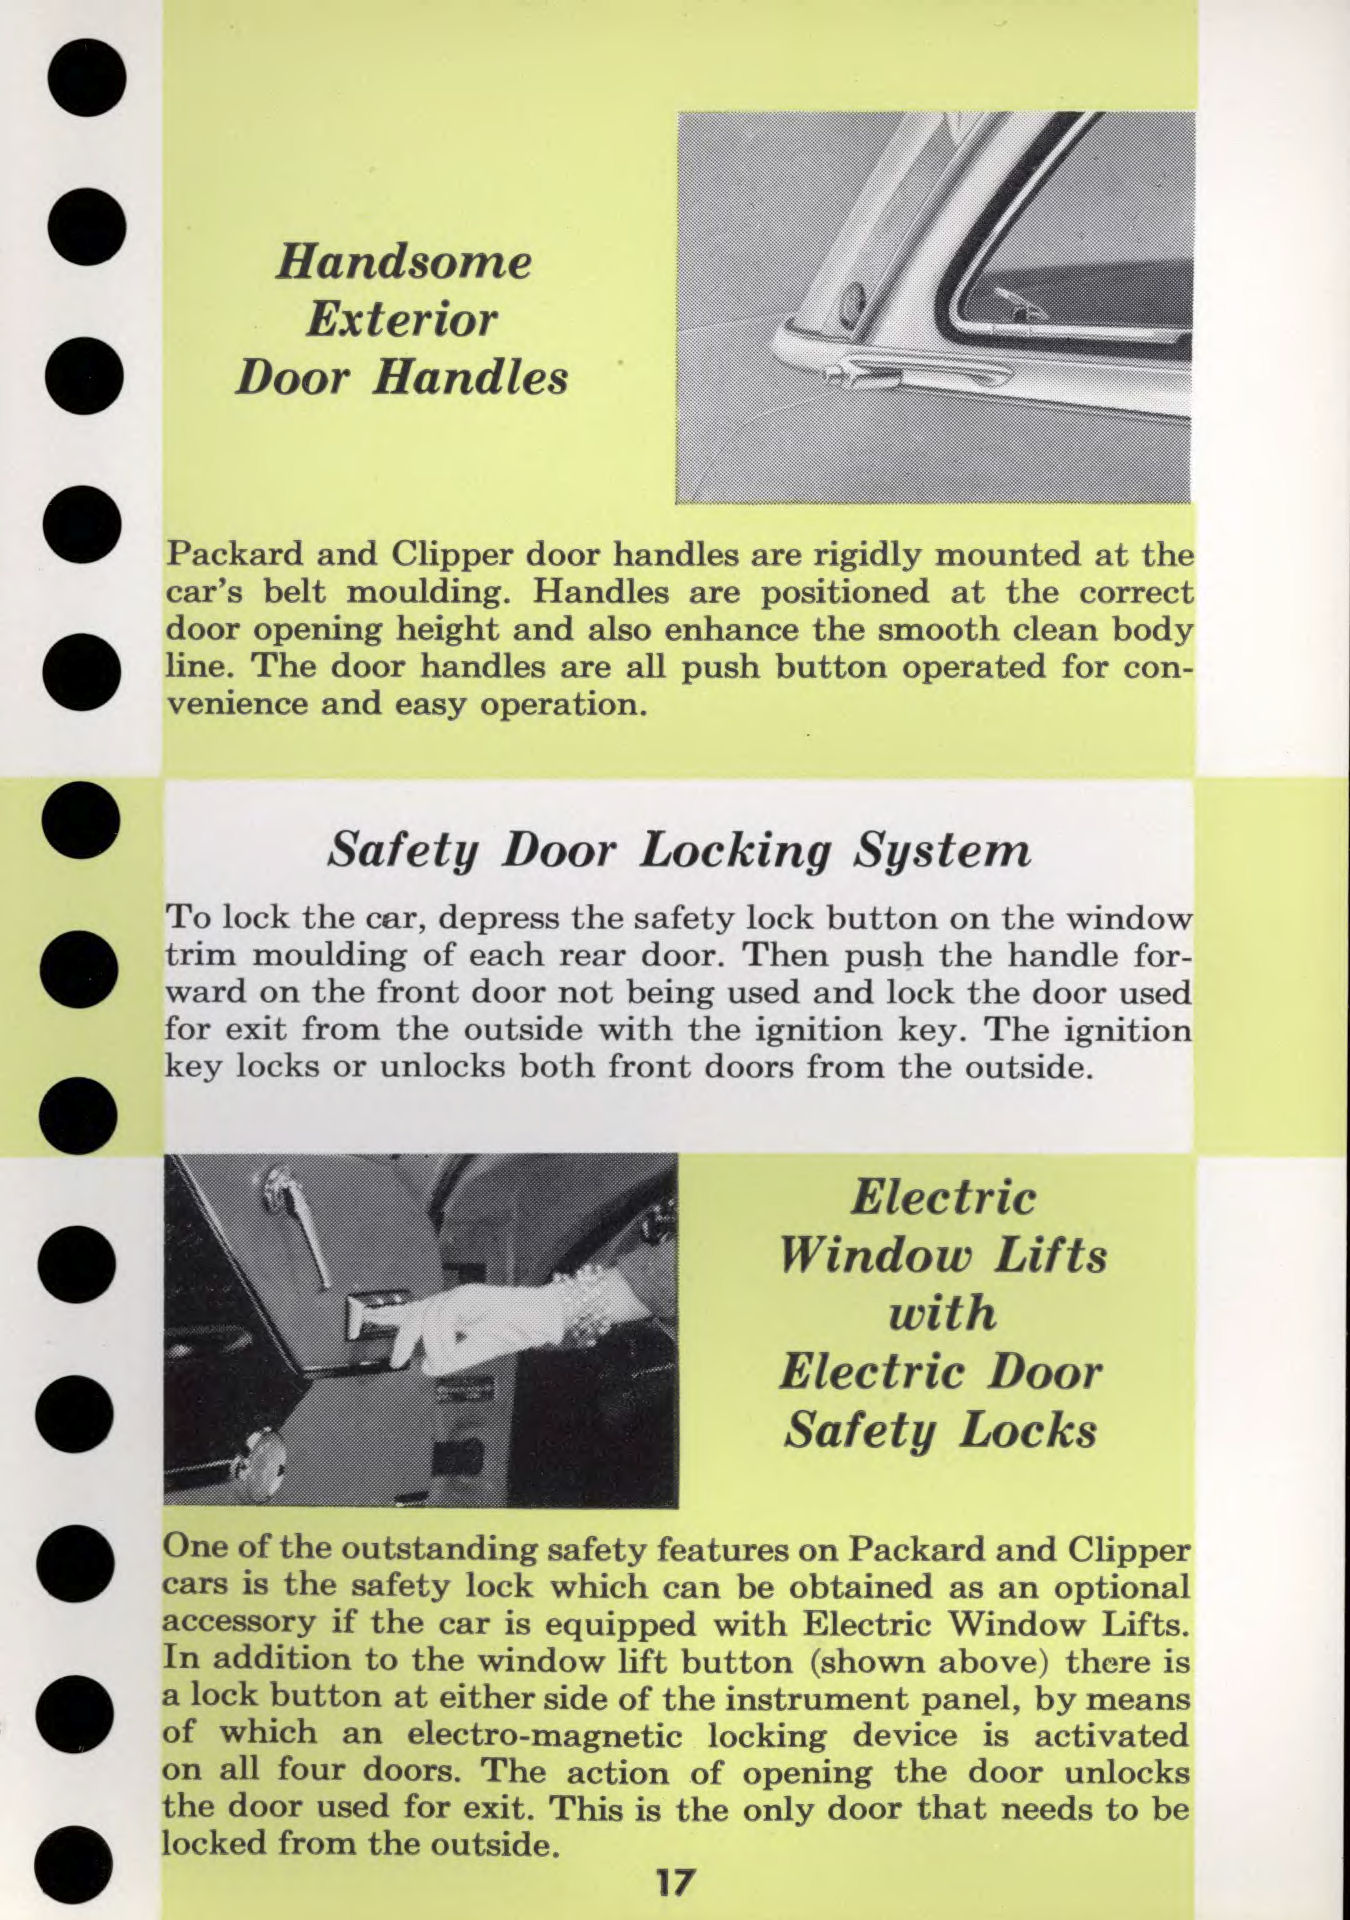 1956 Packard Data Book Page 93